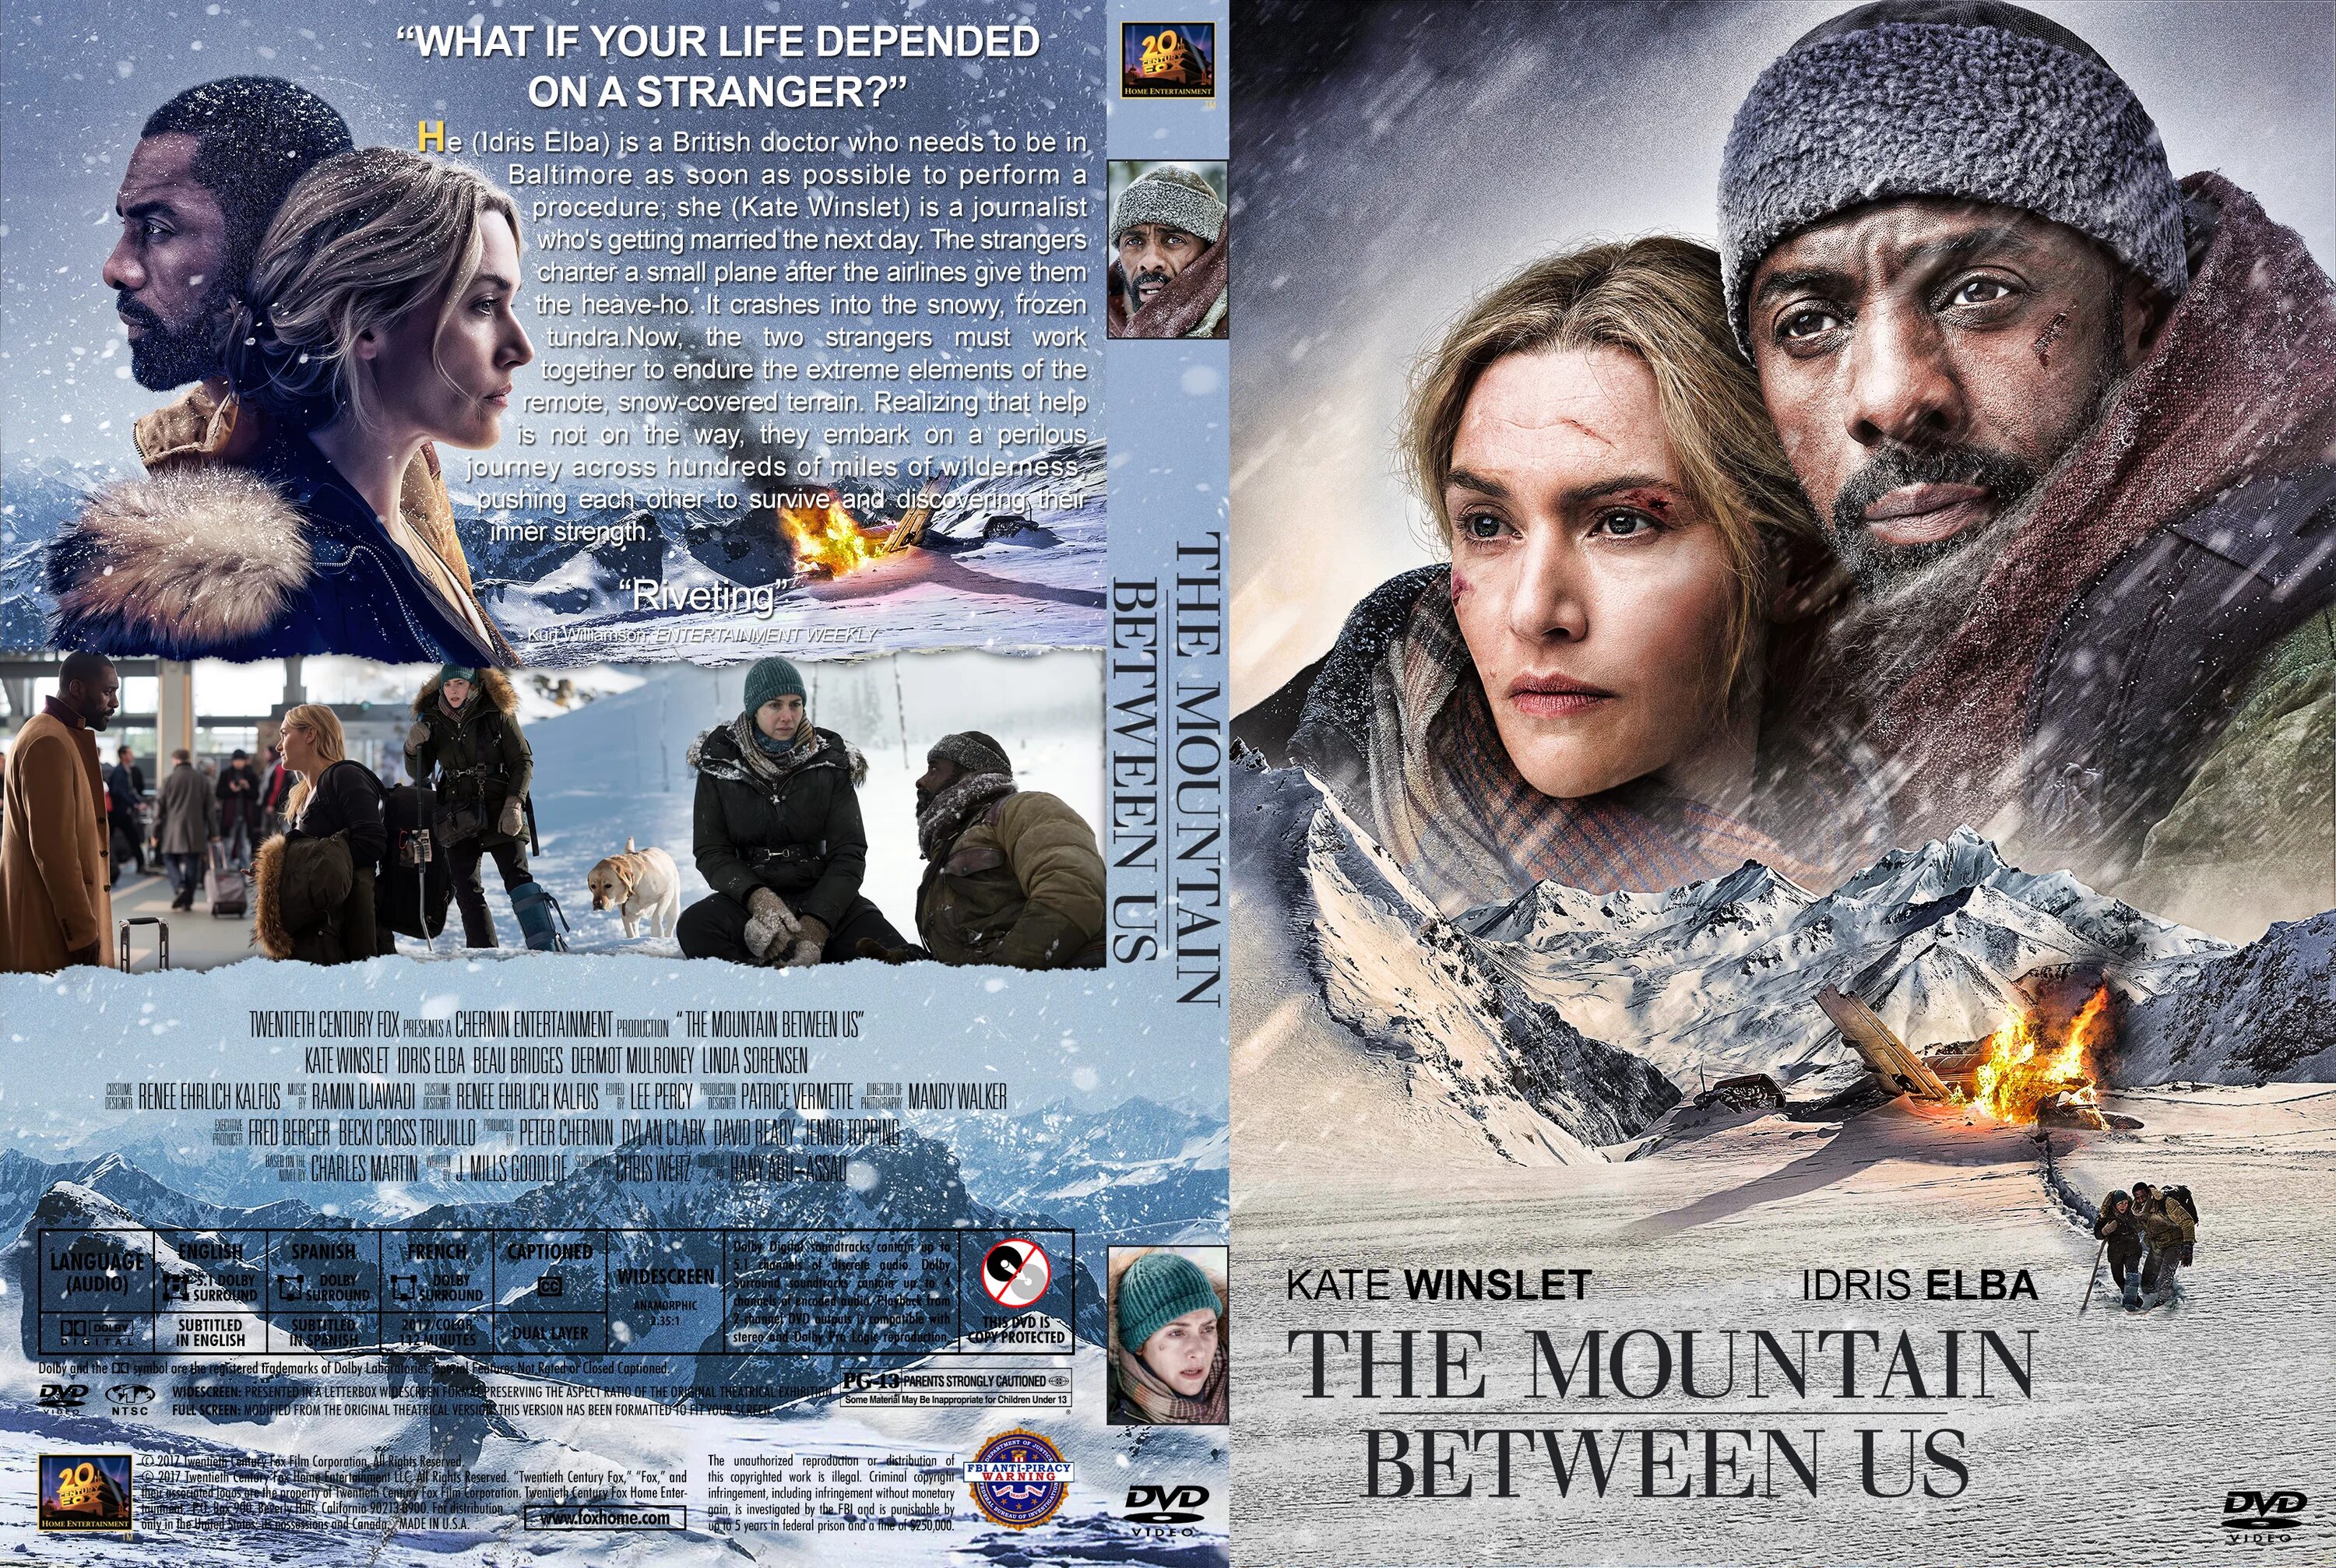 Between us and them. Между нами горы (the Mountain between us). The Mountain between us, 2017 DVD Cover. Между нами горы афиша.